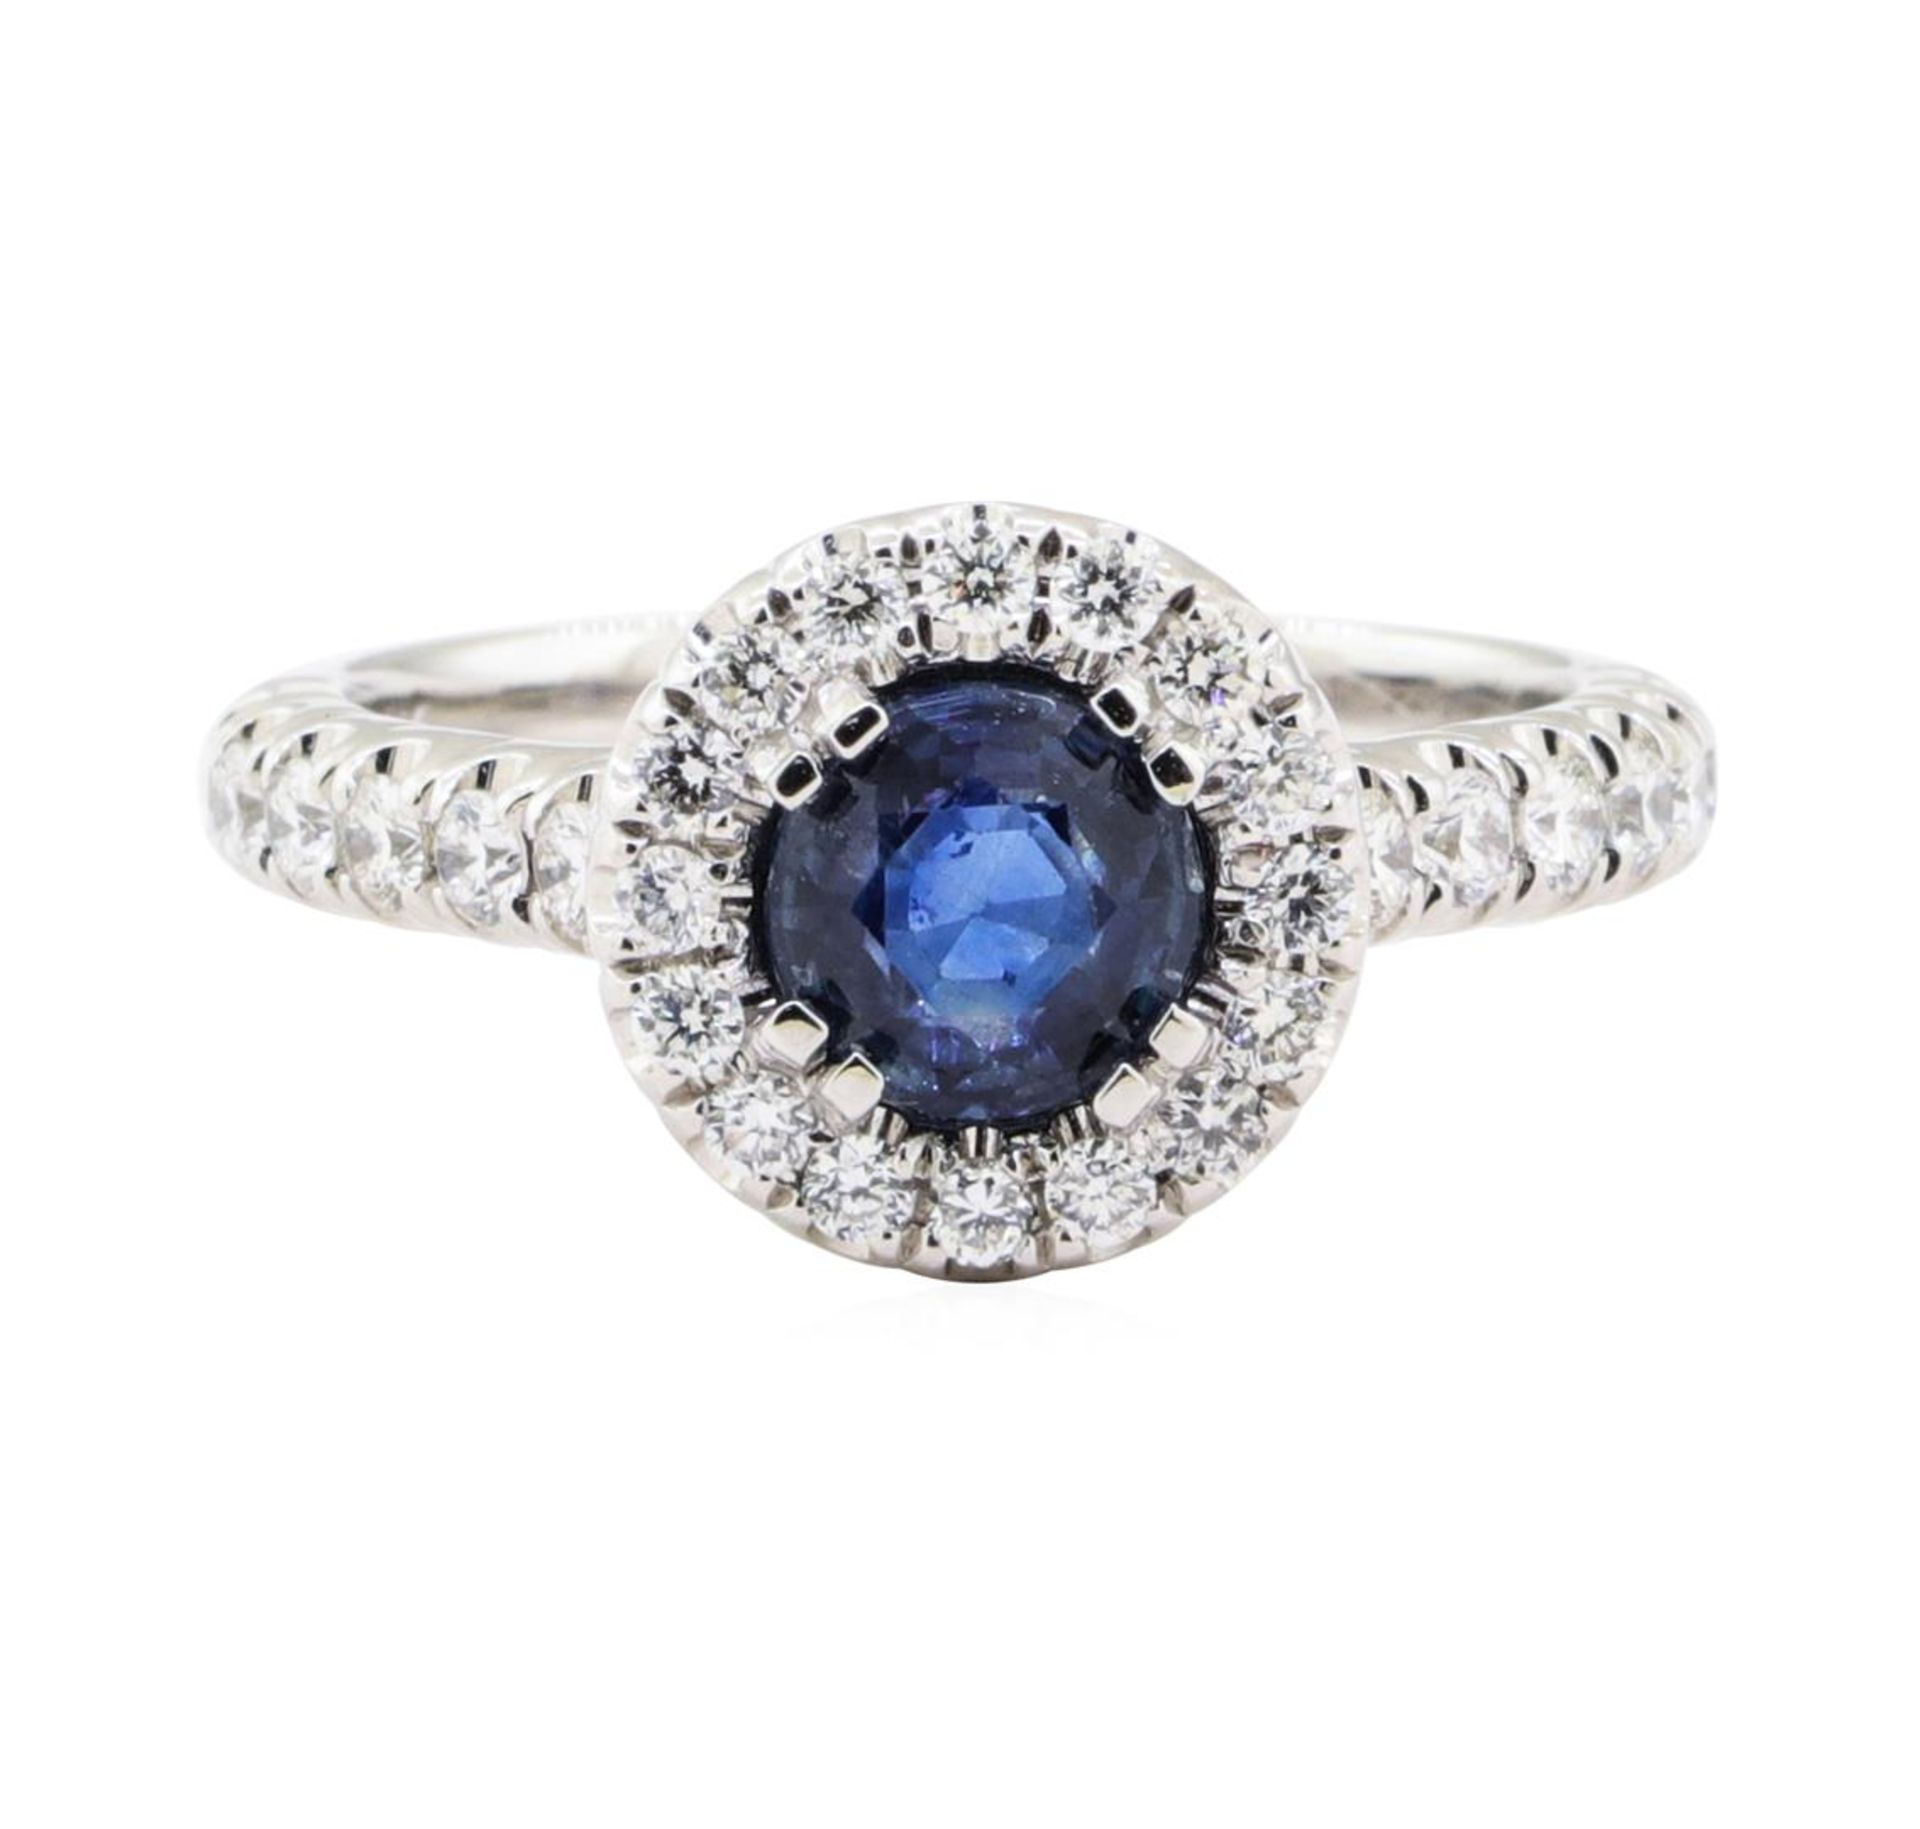 1.42 ctw Sapphire And Diamond Ring - 14KT White Gold - Image 4 of 10